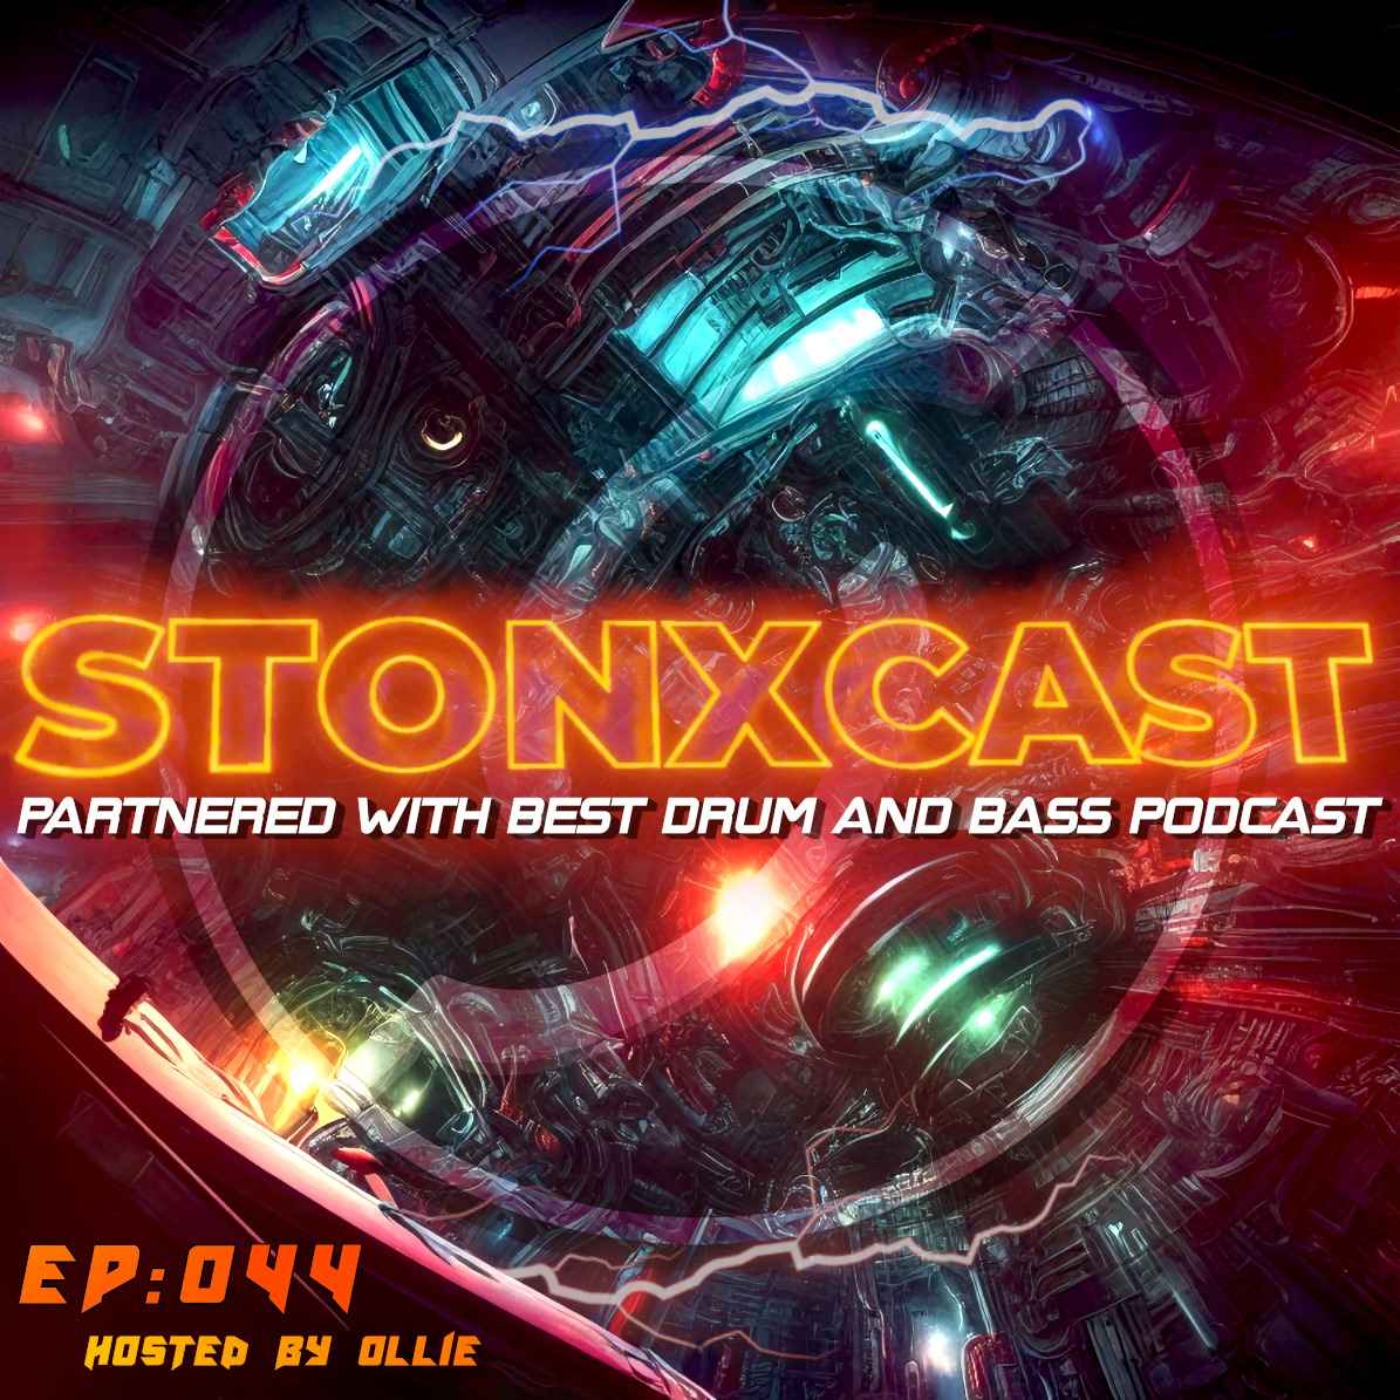 Stonxcast EP:044 - Hosted by Ollie Artwork